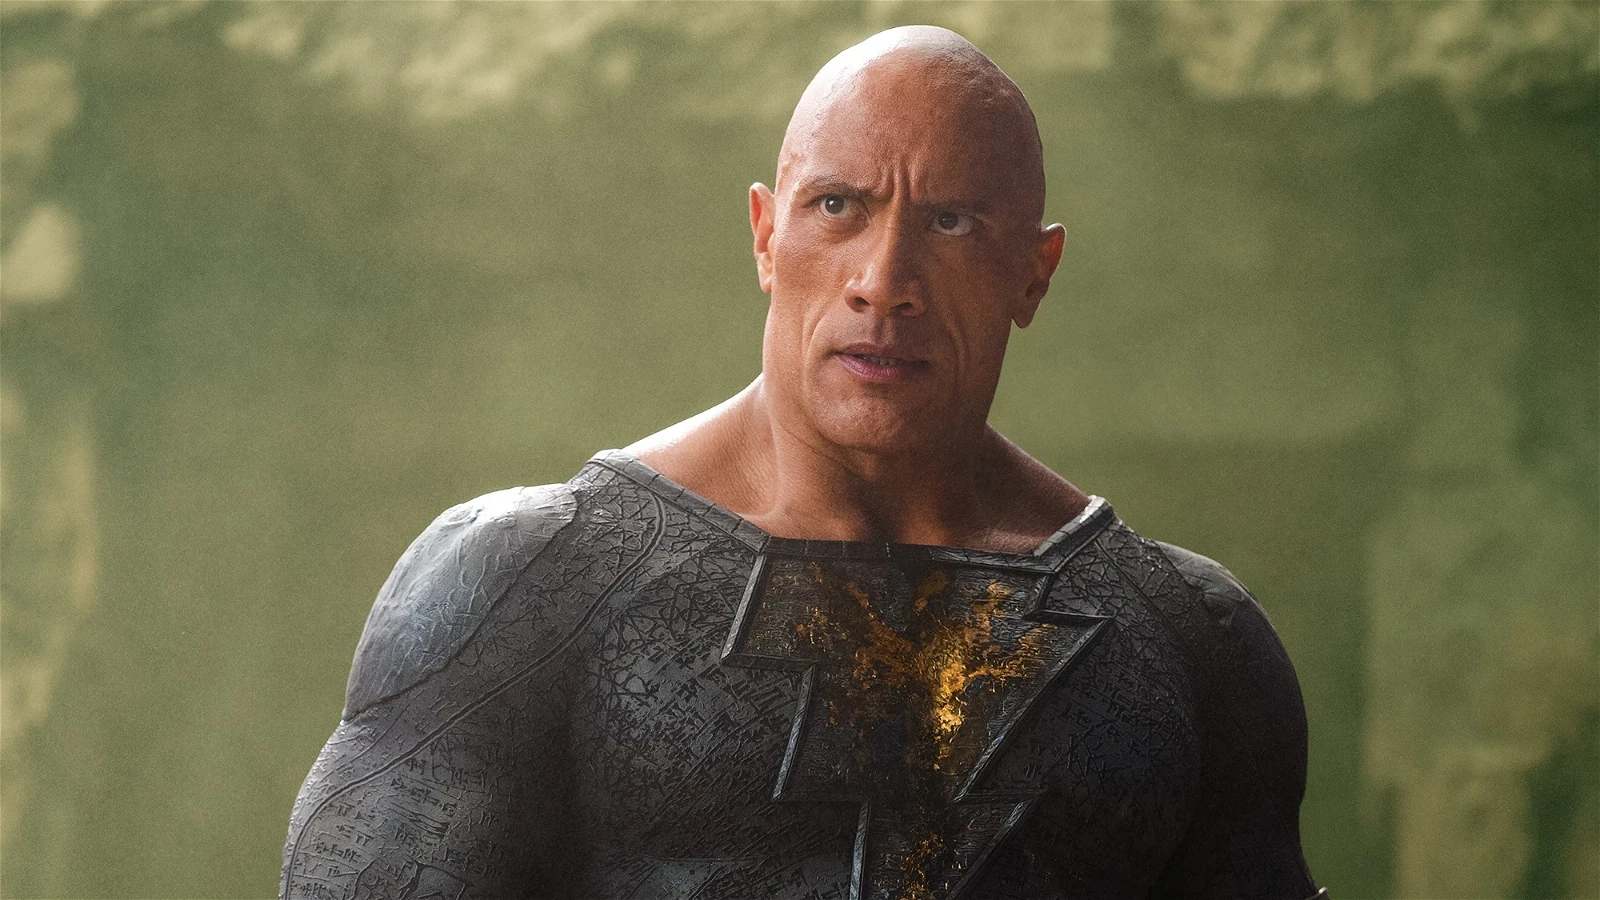 He systematically crippled two franchises”: Dwayne Johnson Vetoed Against Shazam 2 Using Black Adam Characters to Massage His Own Ego That Led to Henry Cavill's Superman Exit - FandomWire